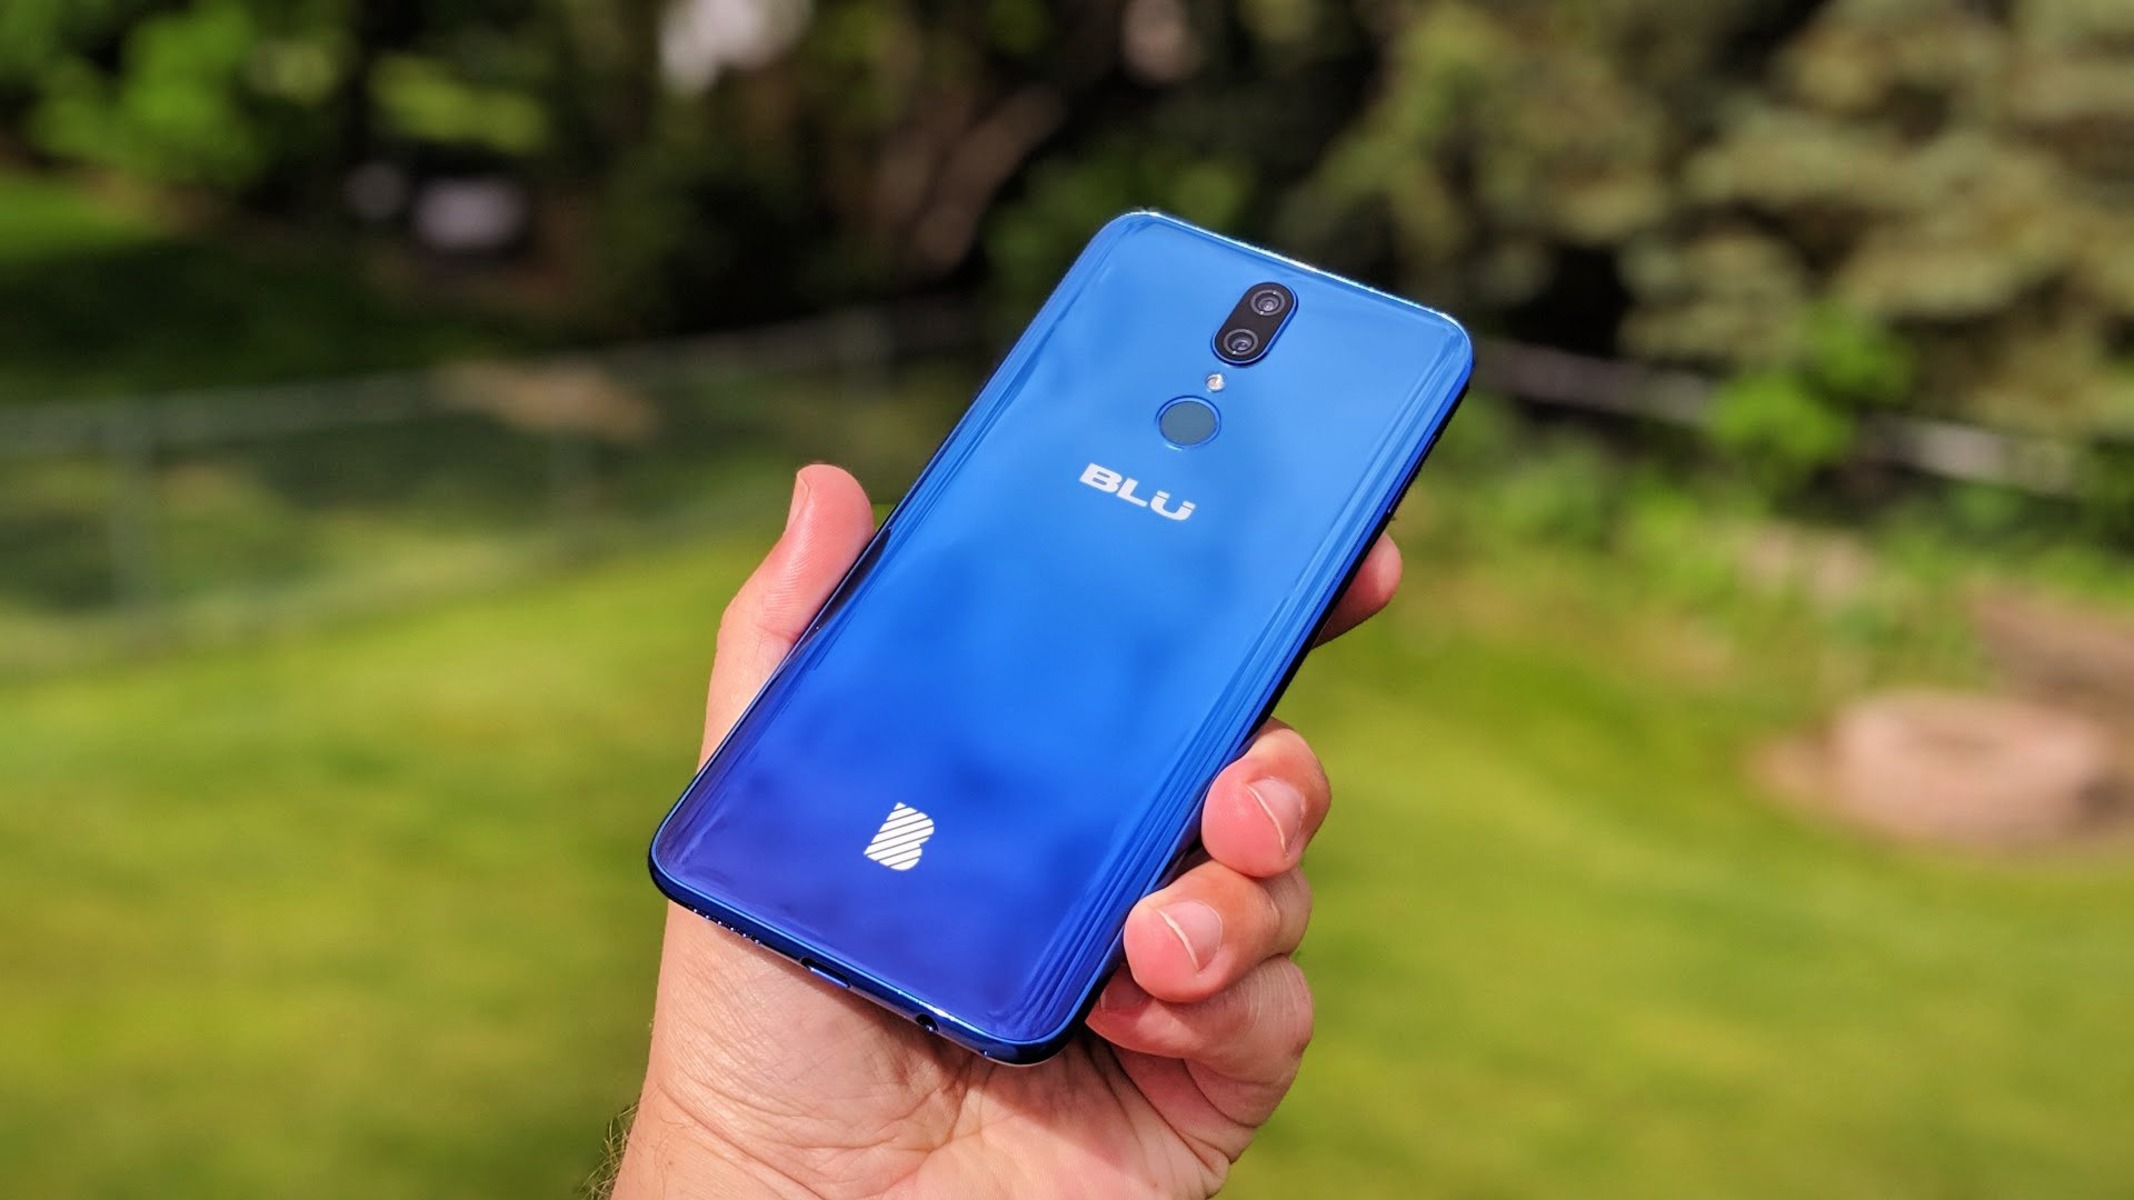 How Much Is A Blu Smartphone